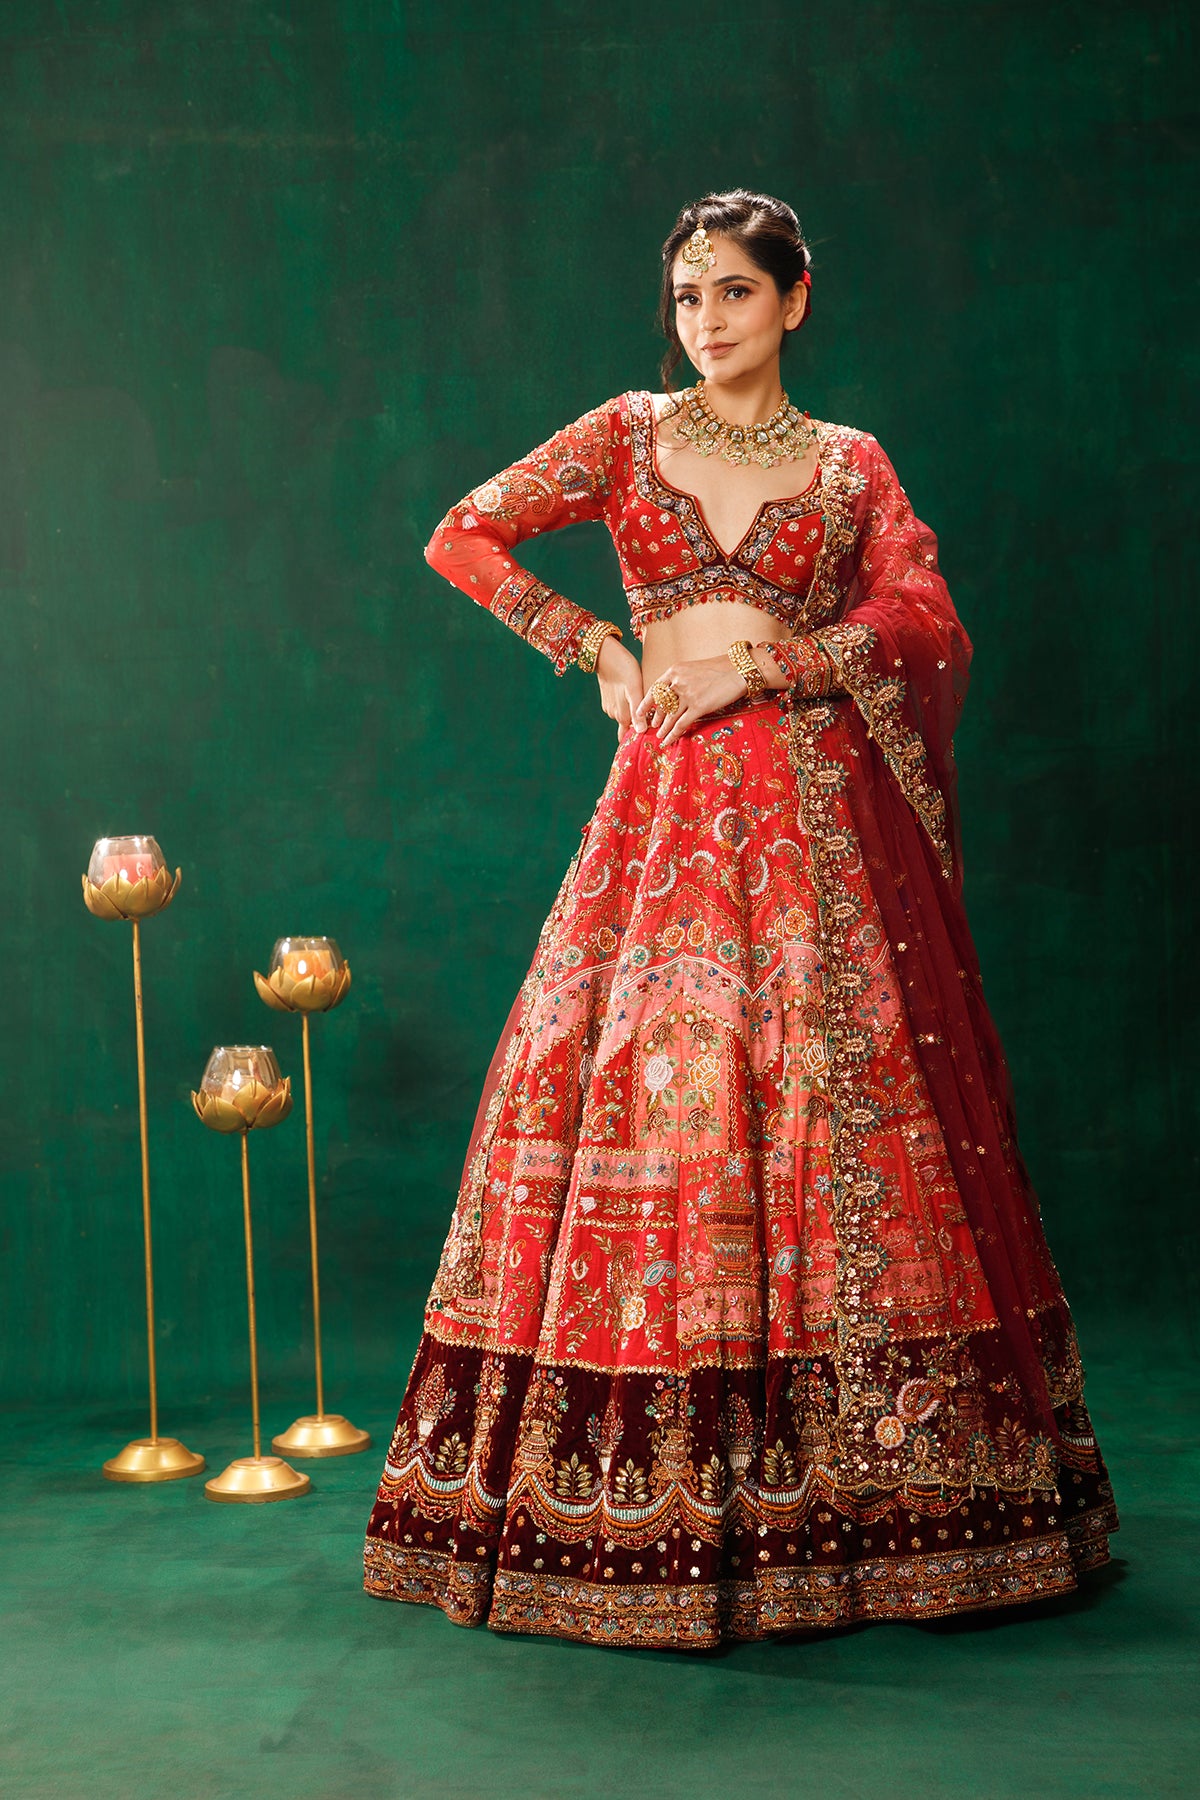 Take Inspo from These 12 Stunning Blood Red Bridal Lehenga Images and Pick  Your Favourites | Bridal lehenga images, Pink bridal lehenga, Bridal lehenga